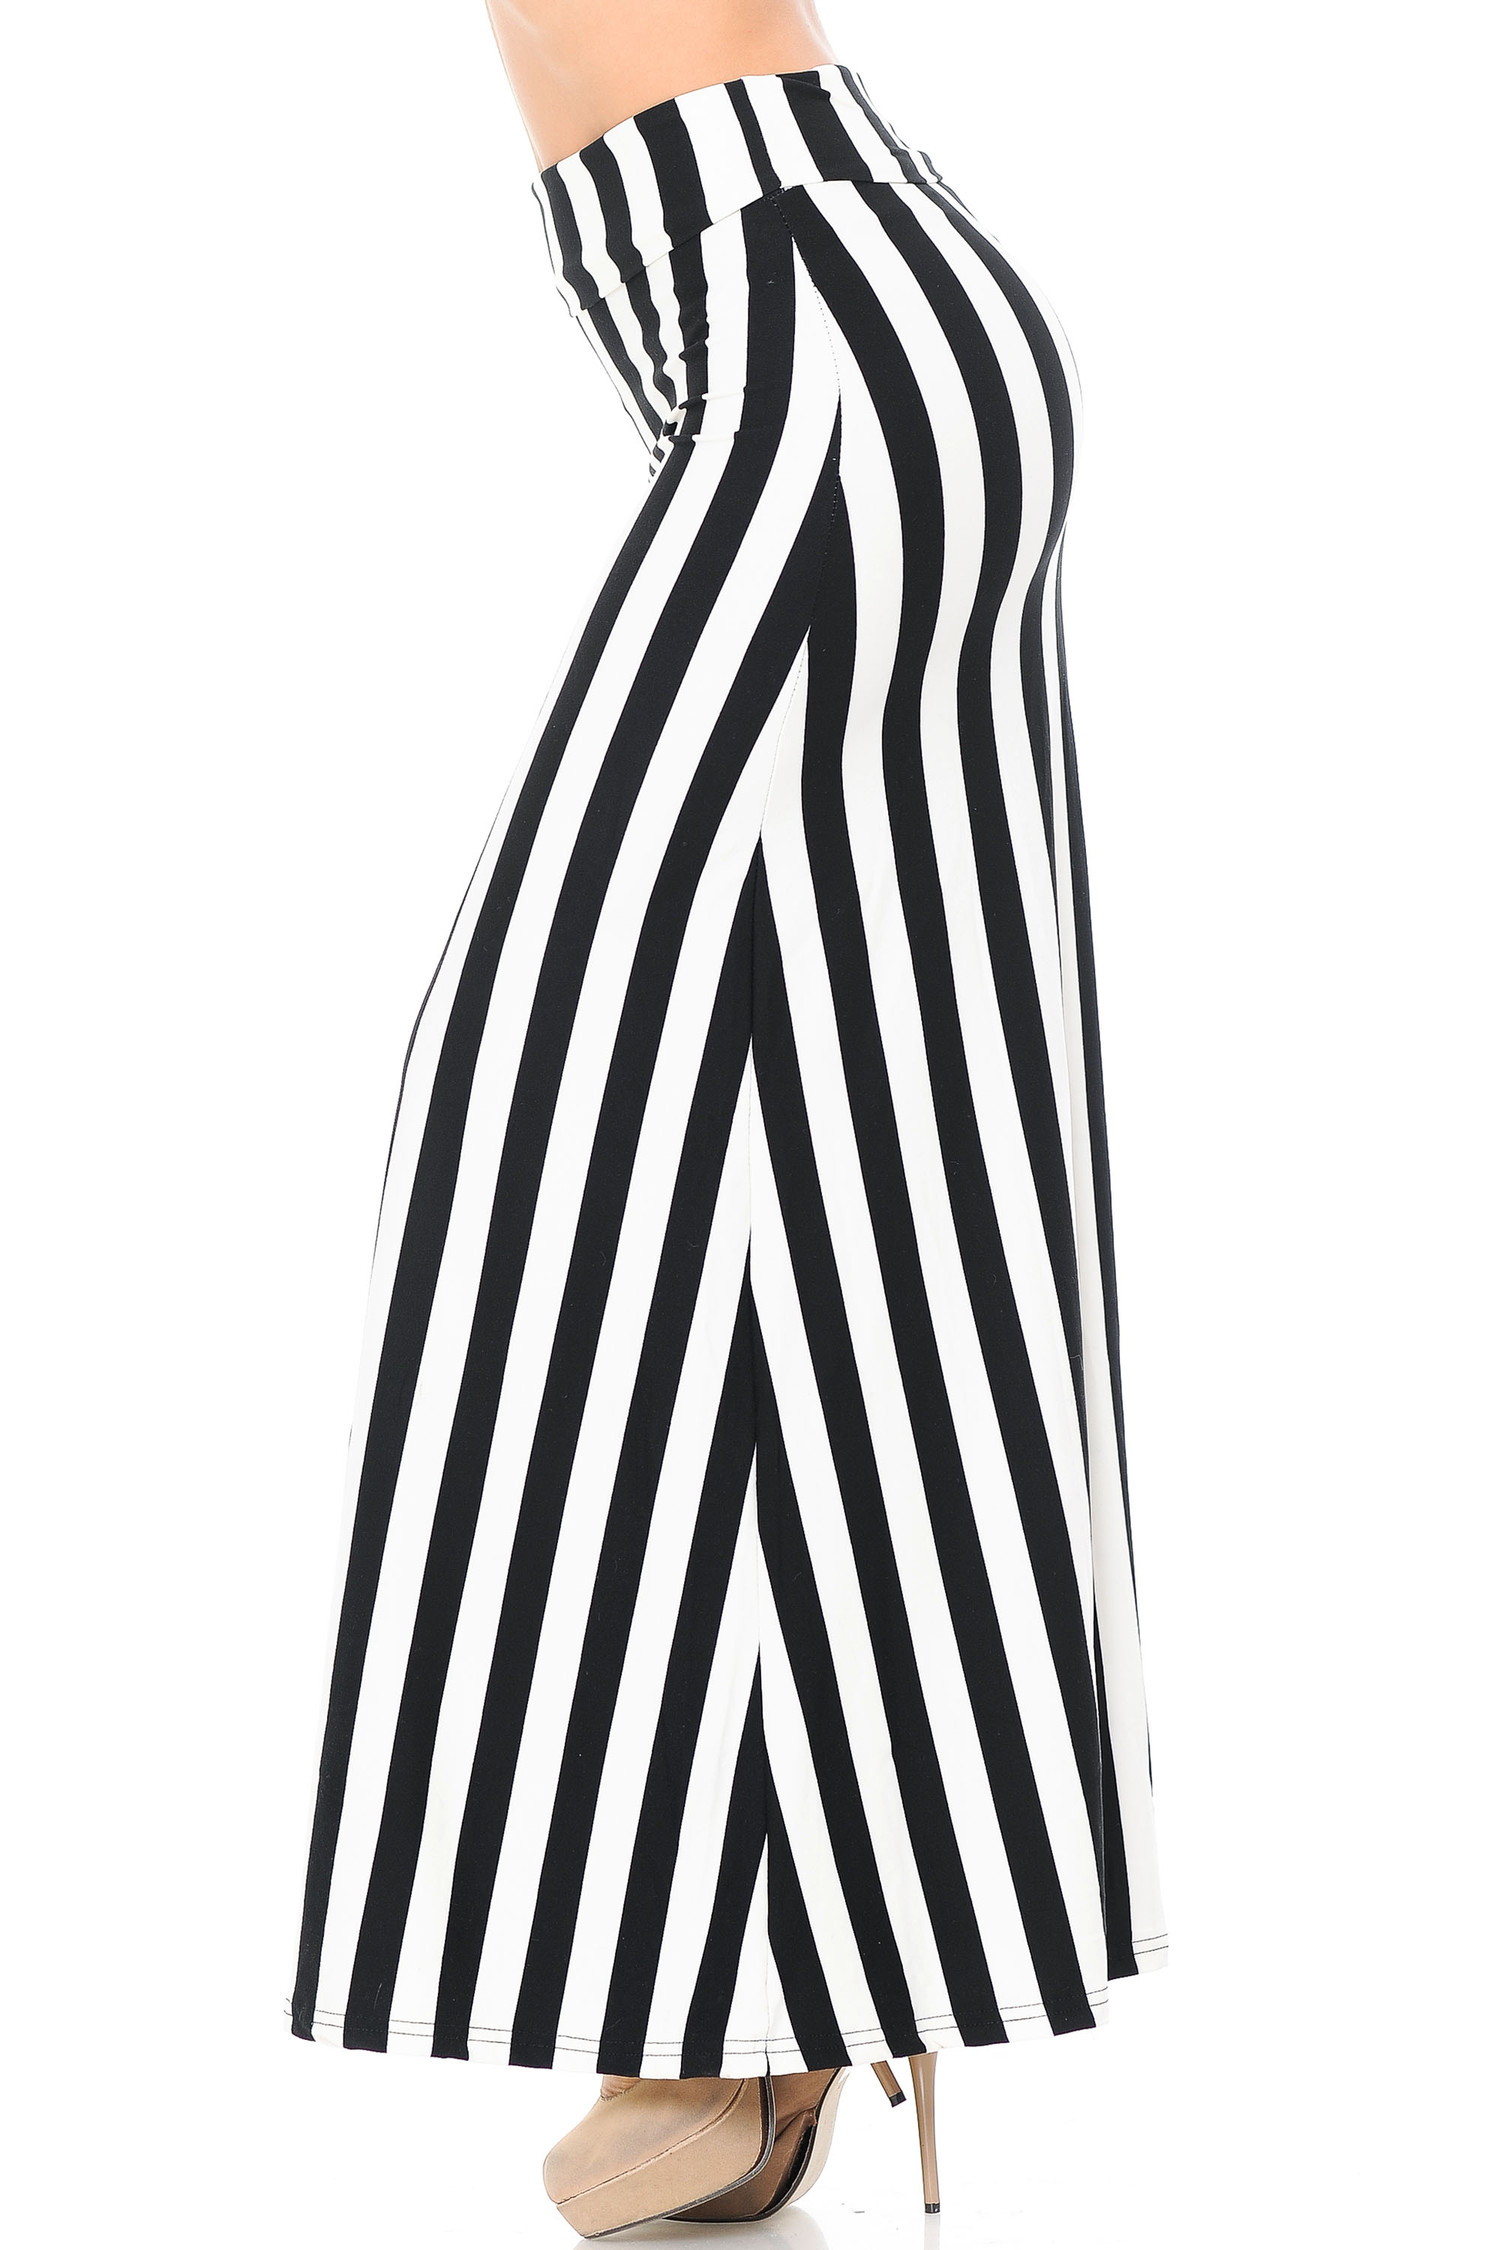 Buttery Soft Black and White Wide Stripe Maxi Skirt